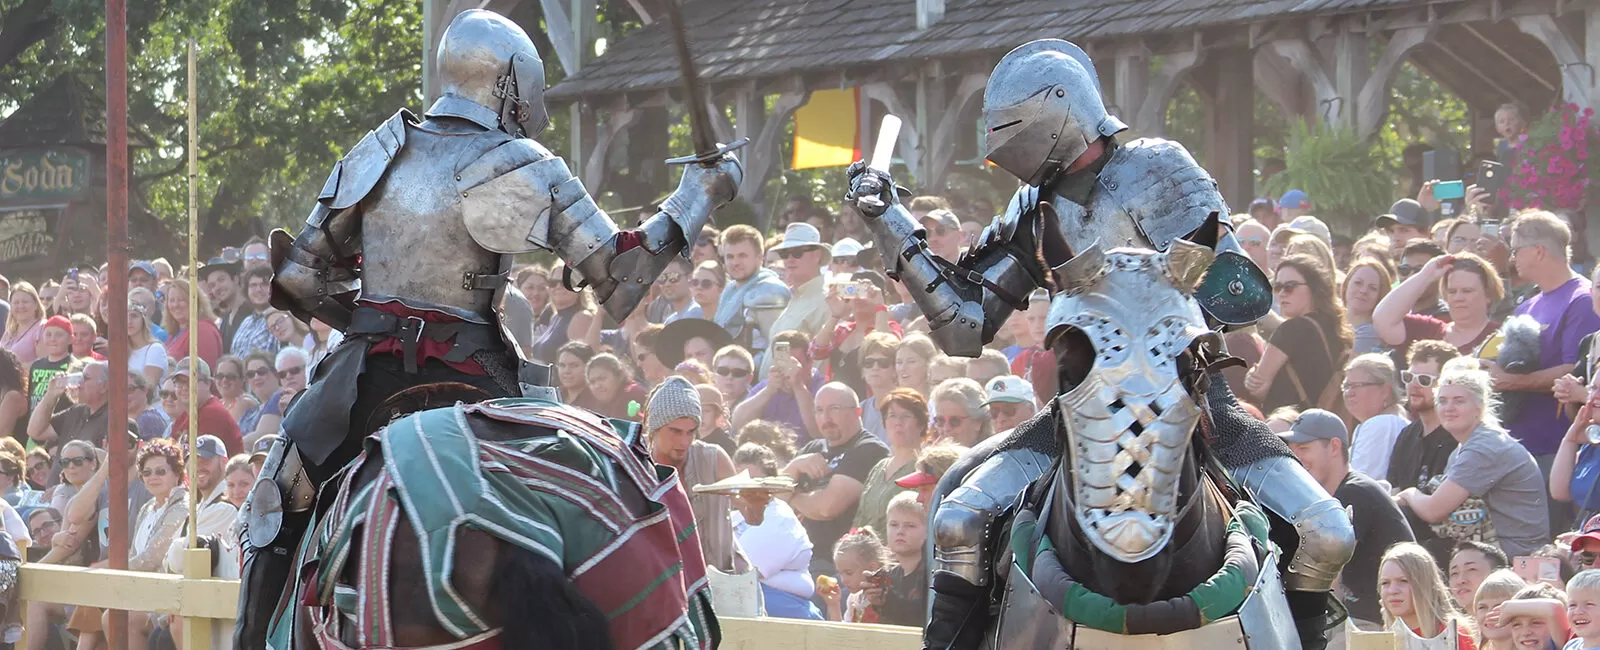 Fun-for-the-whole-family-at-the-Minnesota-Renaissance-Festival